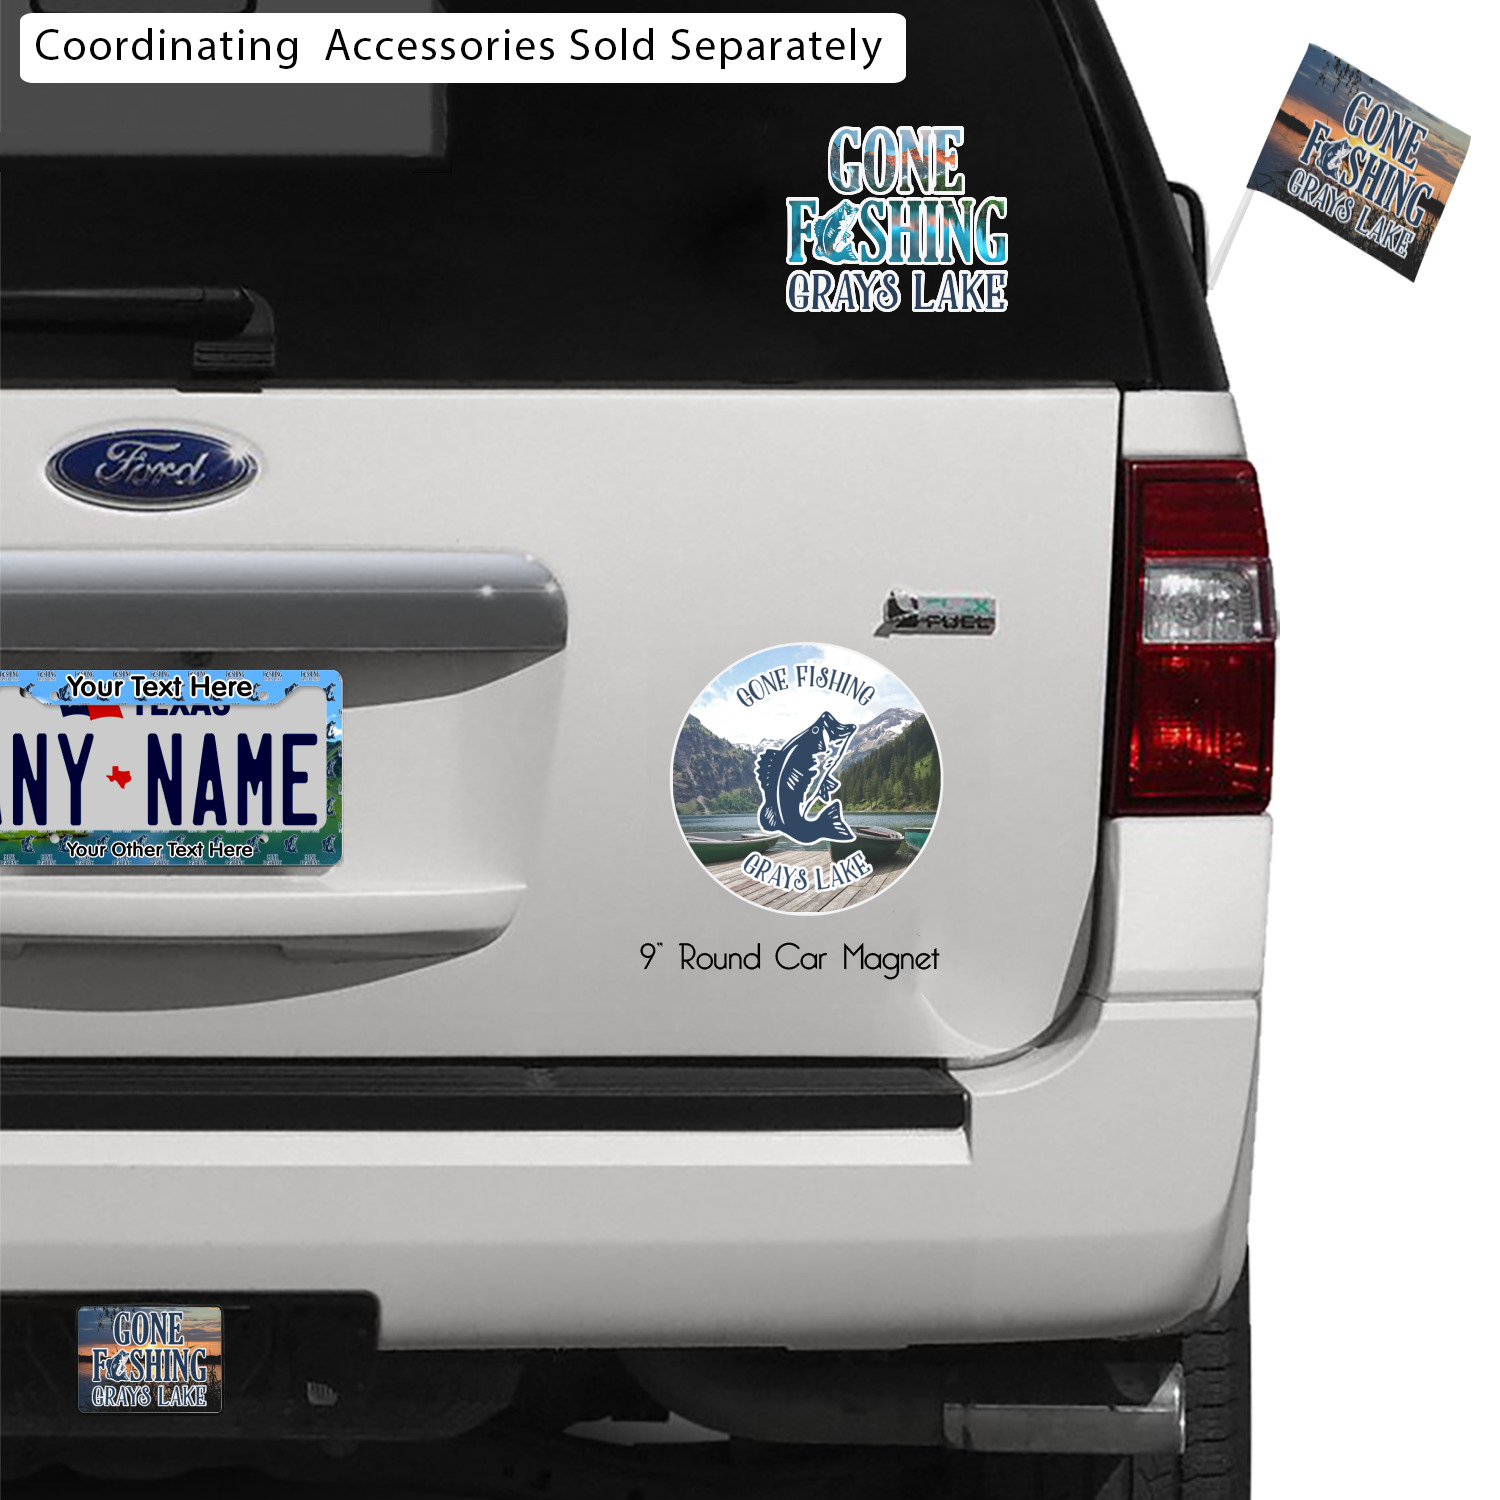 3. Make a Statement with Personalized Car Accessories for Hunting and Fishing Enthusiasts 